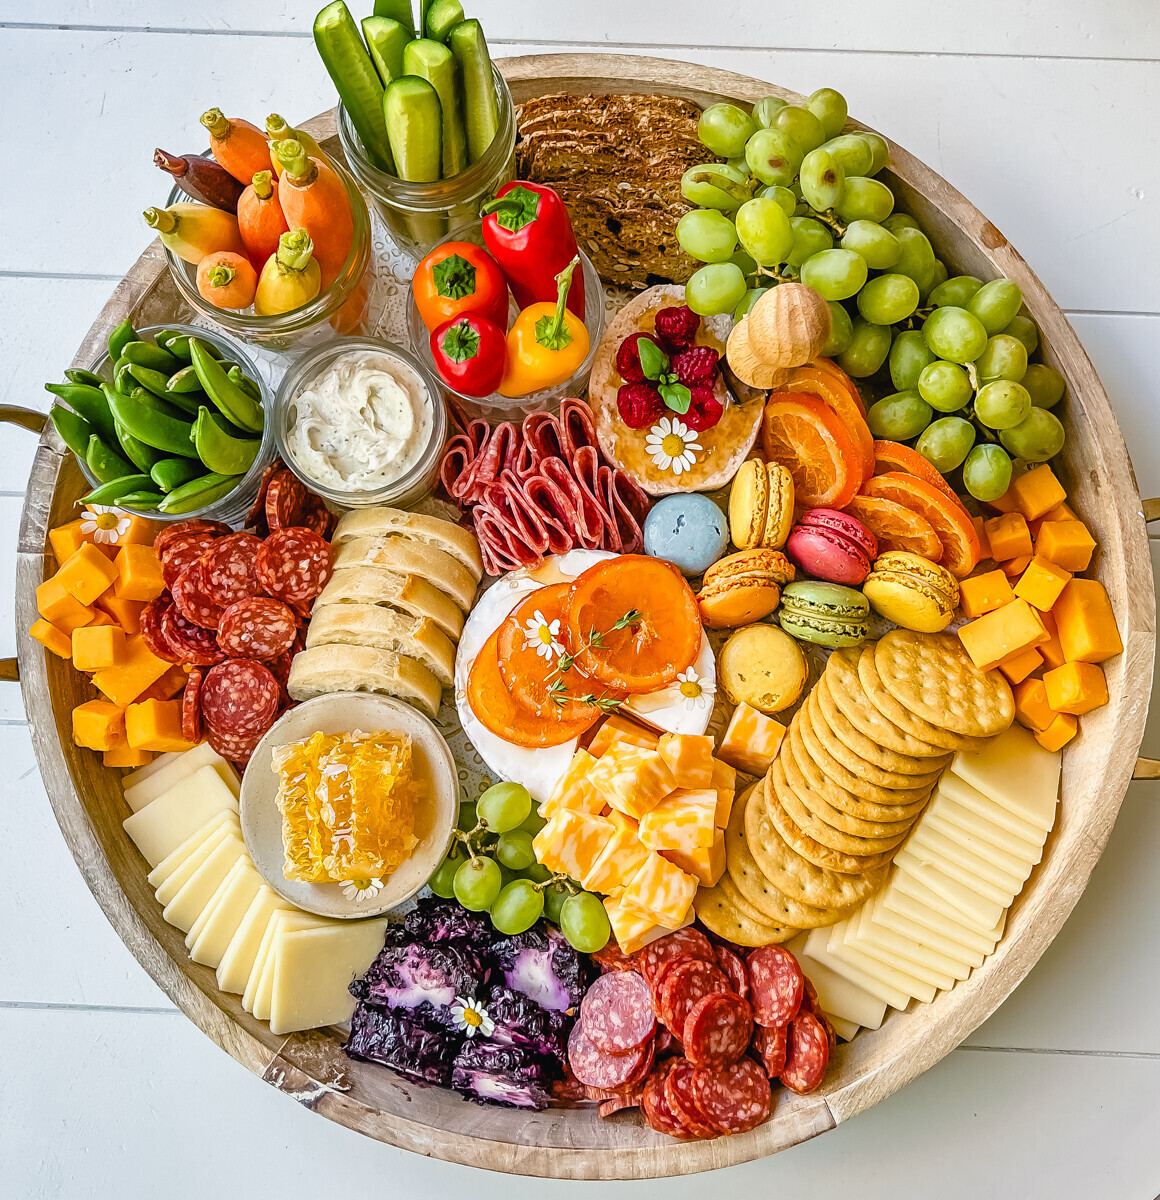 Round charcuterie committee  with meats, cheese, crackers, and different   colorful snacks